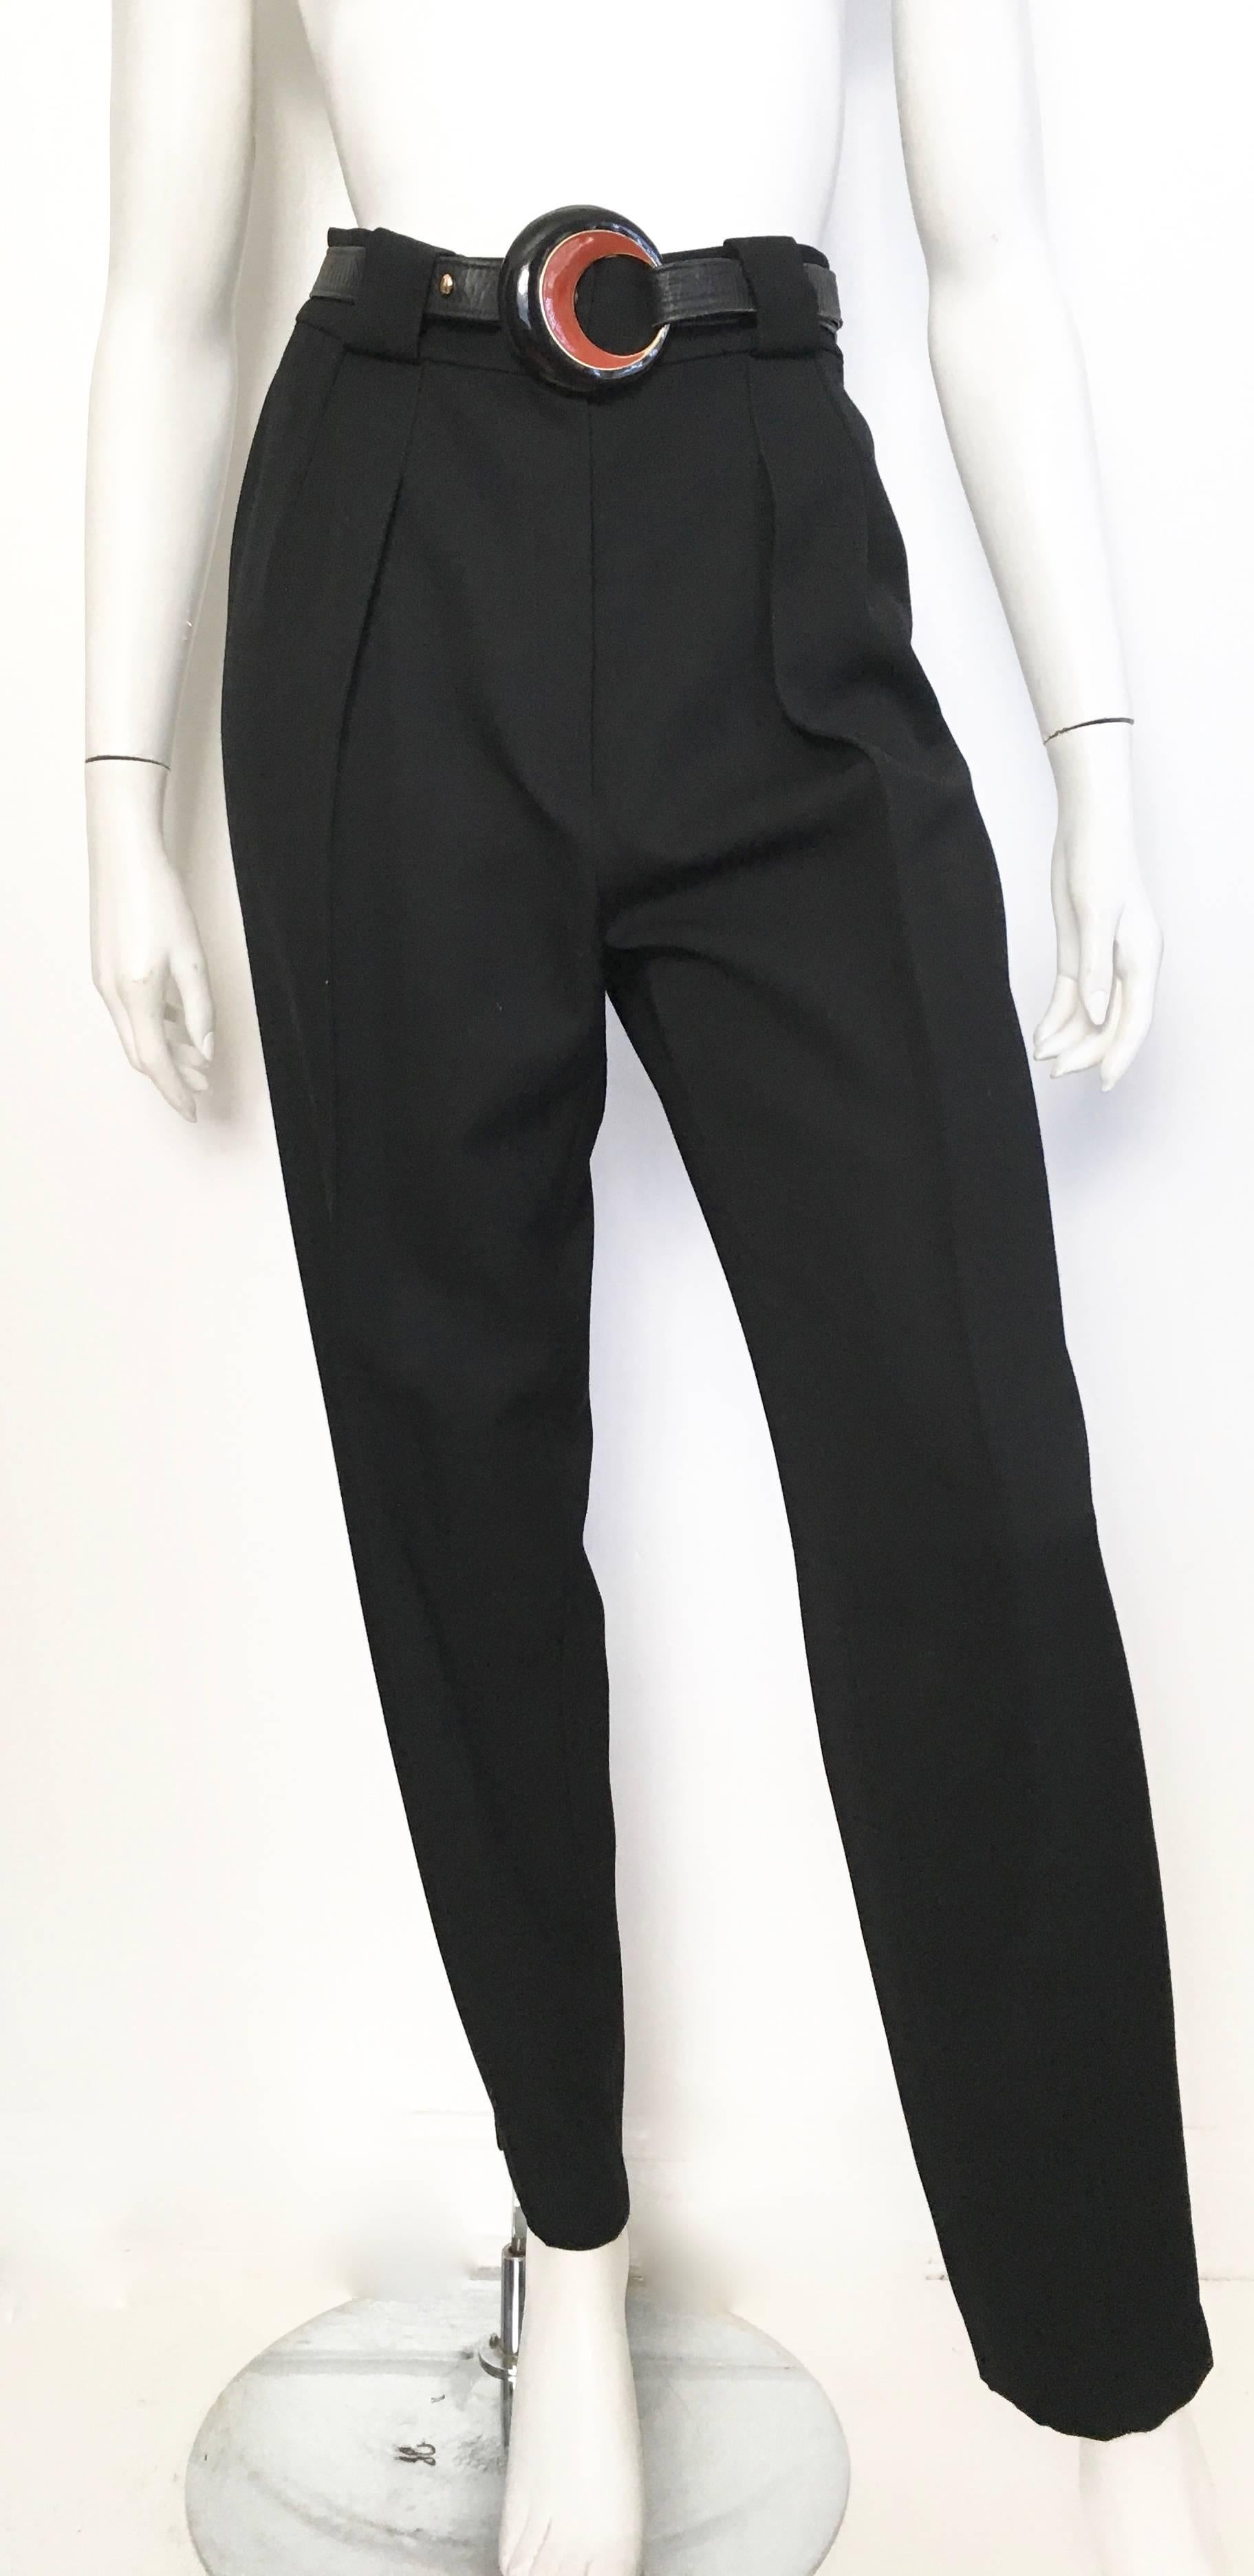 Karl Lagerfeld 1980s Black Wool Pleated Pants Size 4/6. For Sale 1